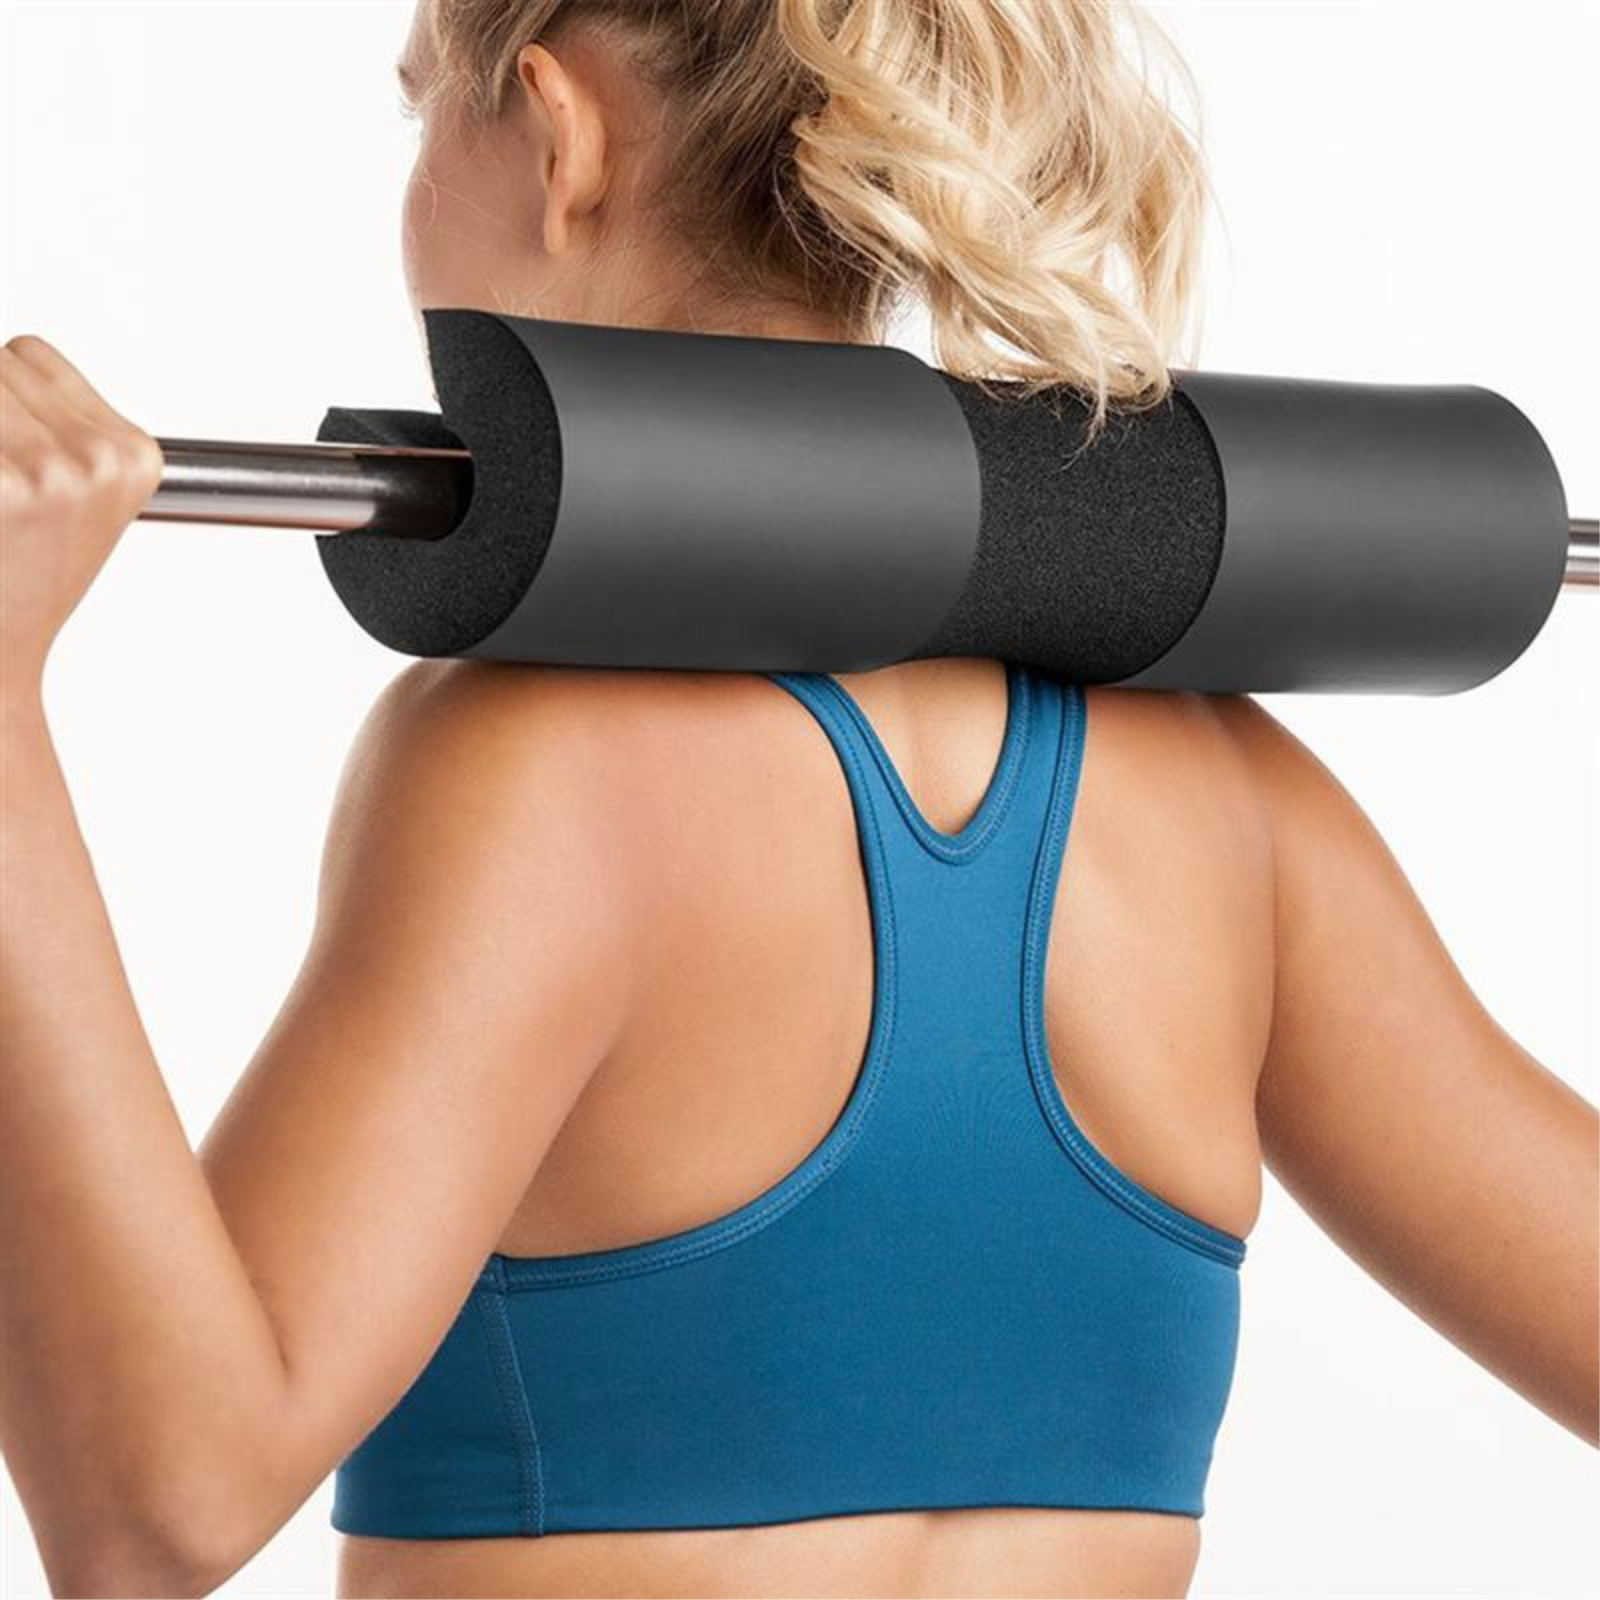 Barbell Cushion for Hip Thrusts